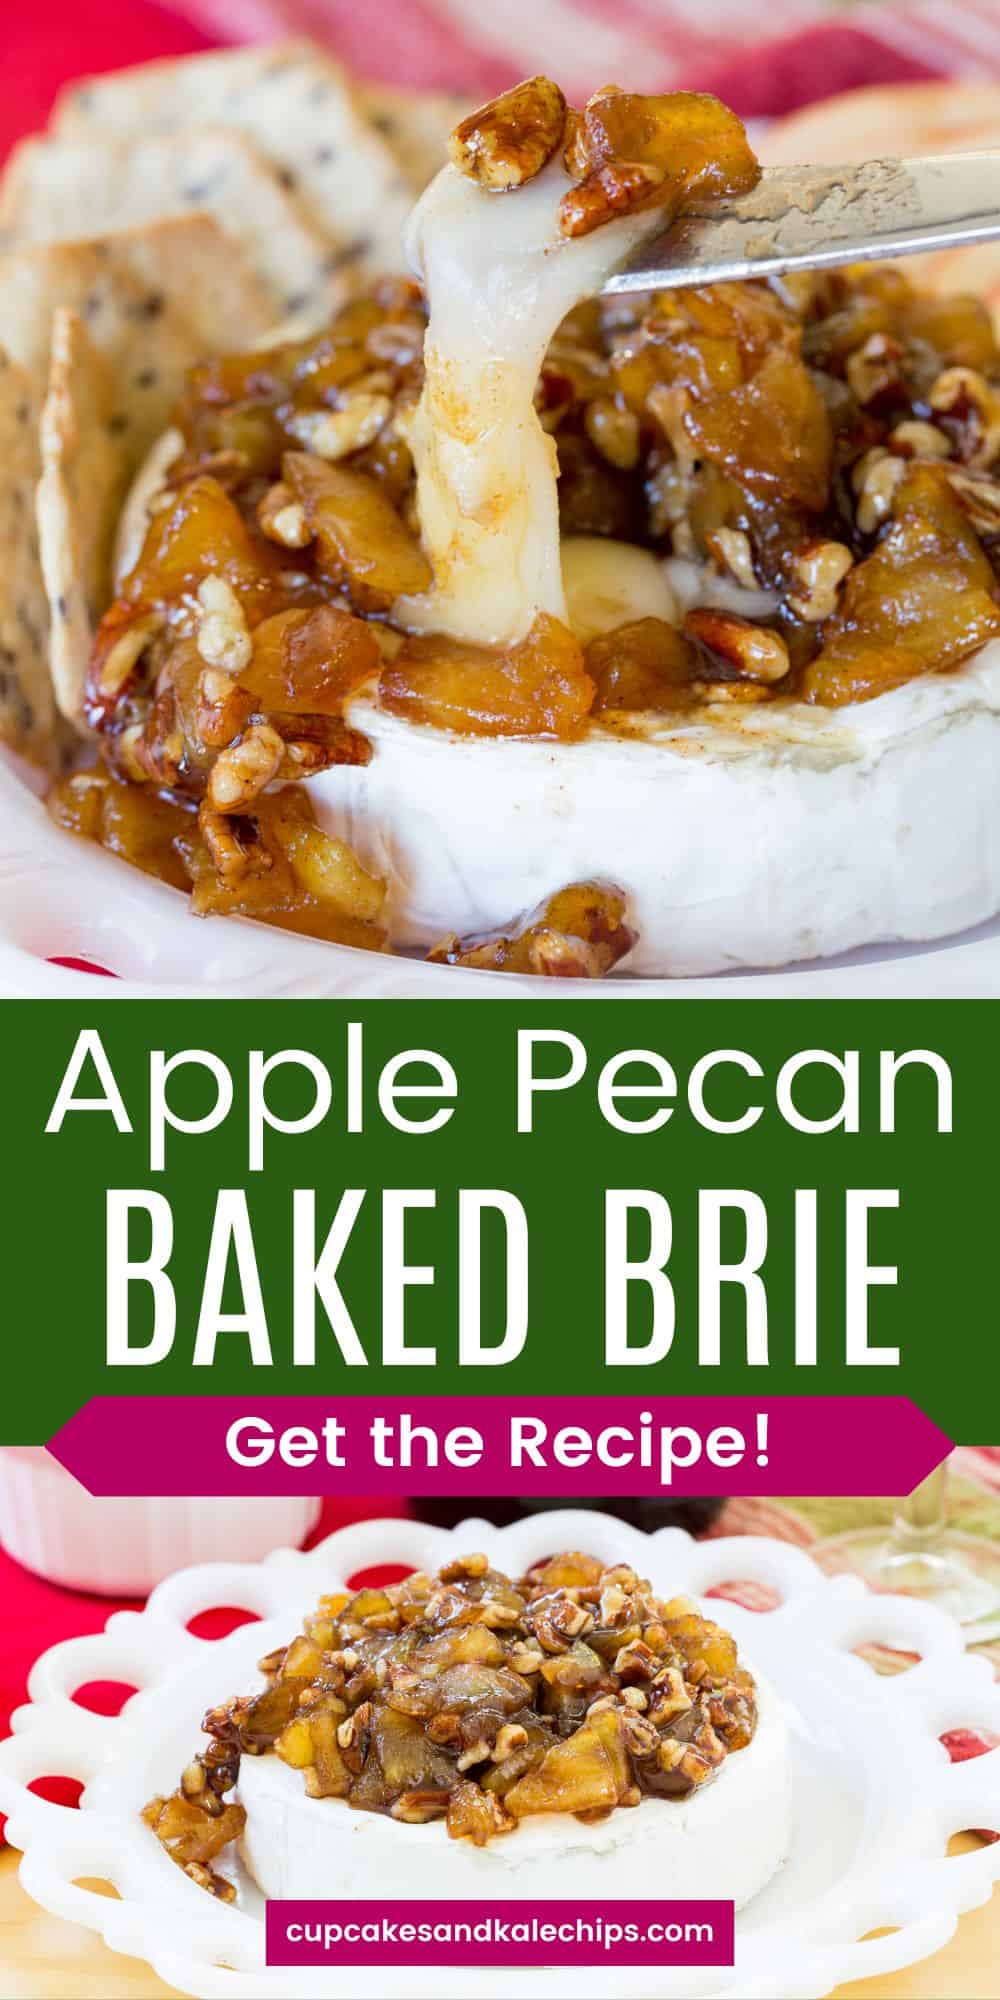 Baked Brie with Apples and Pecans | Cupcakes & Kale Chips